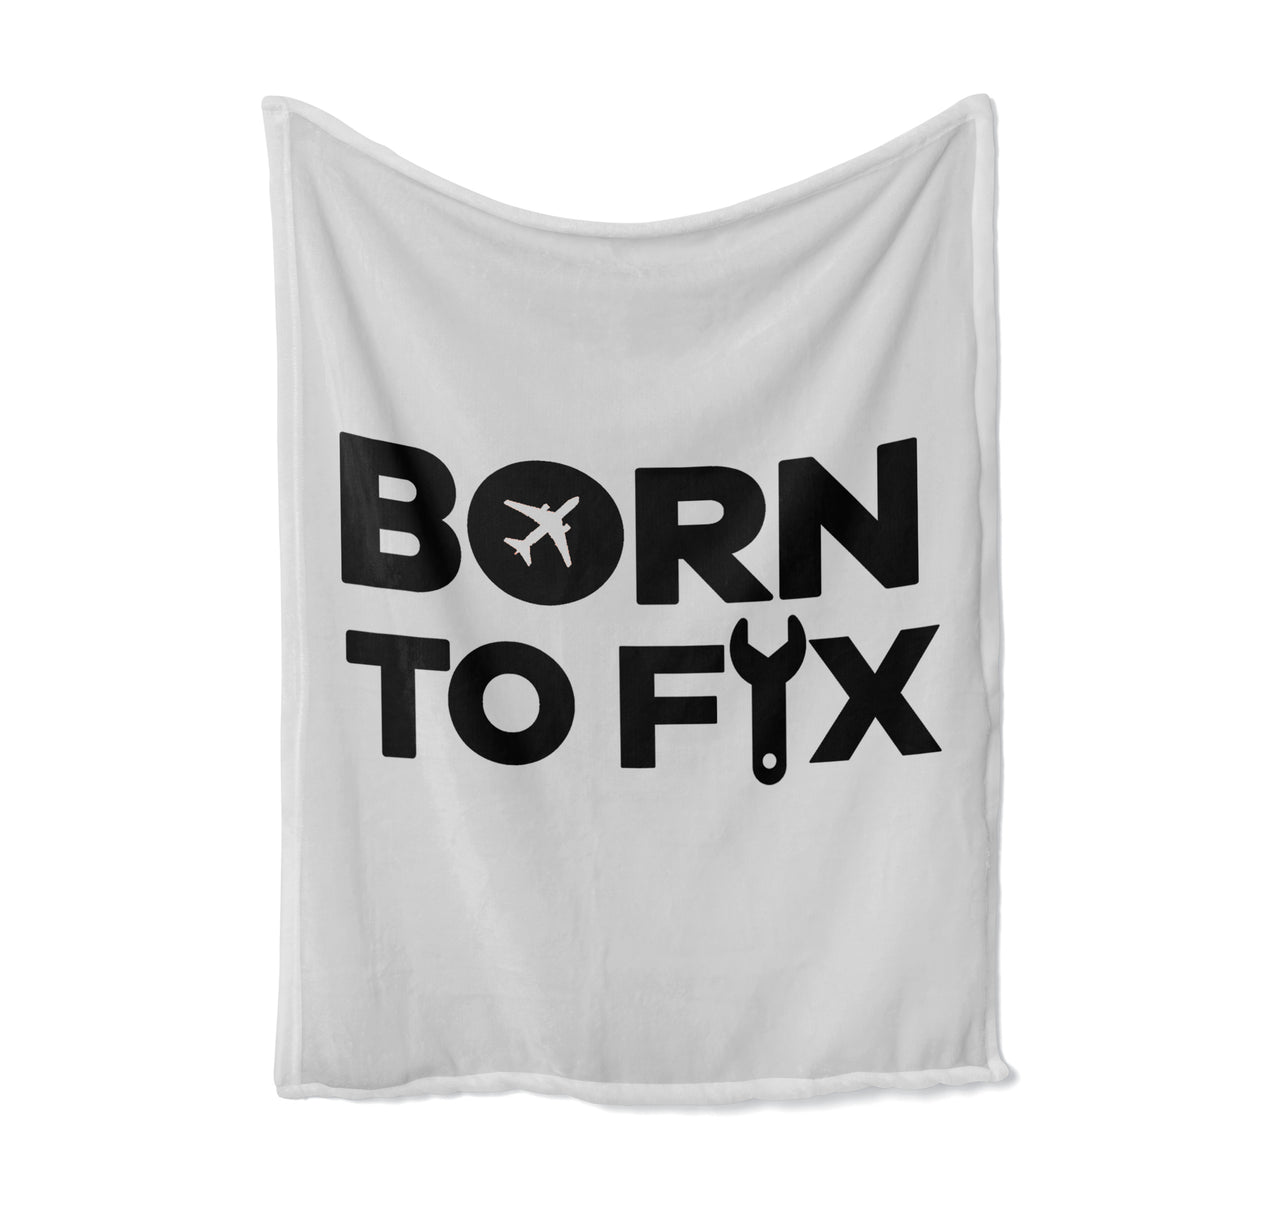 Born To Fix Airplanes Designed Bed Blankets & Covers